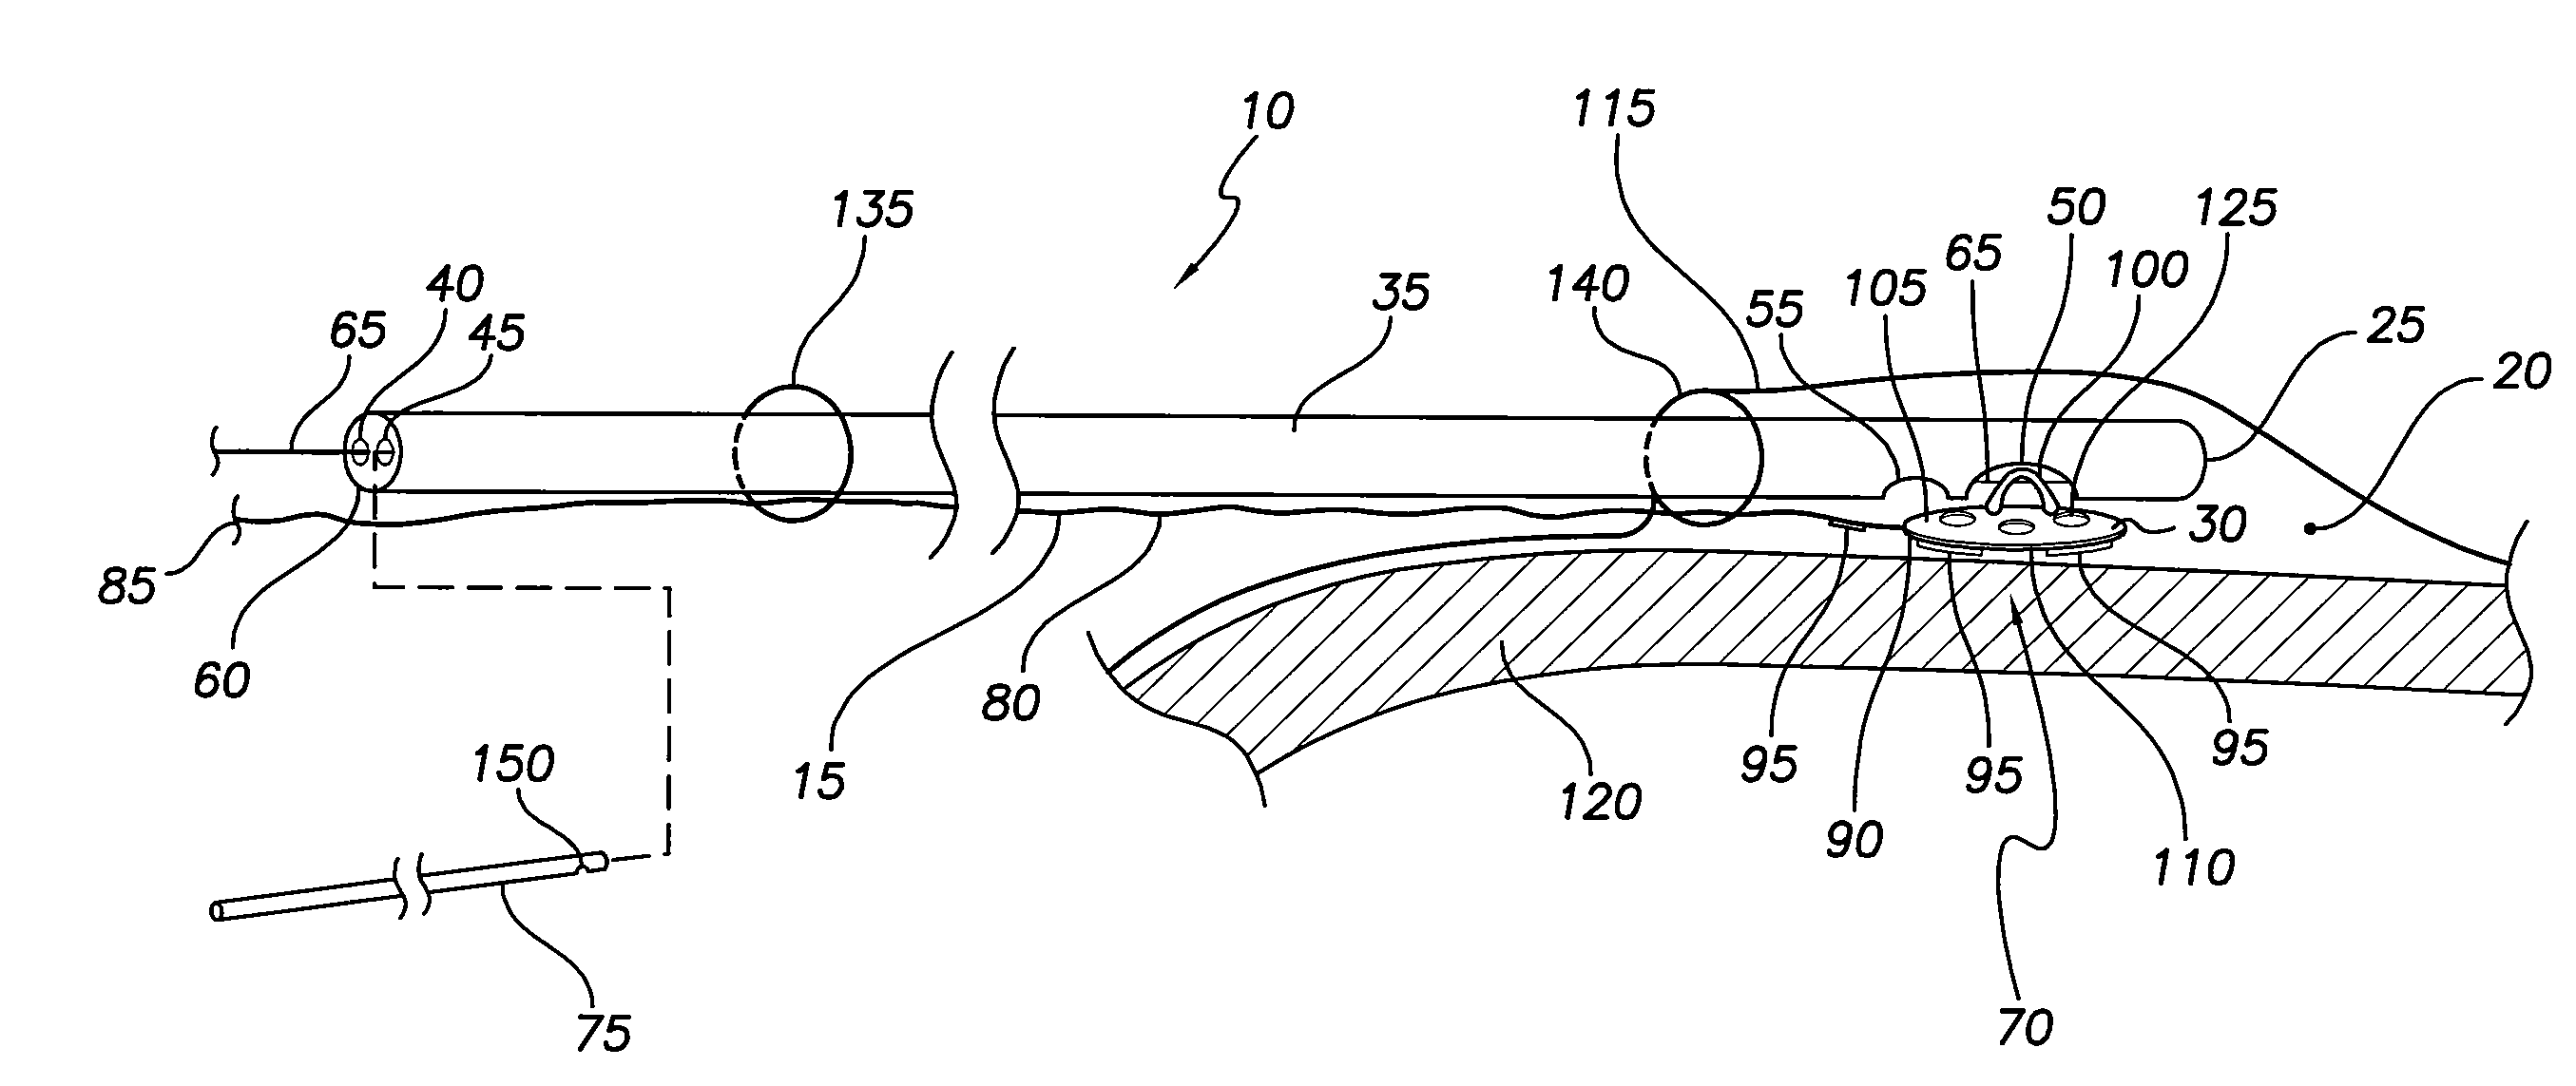 System and method for lead implantation in a pericardial space